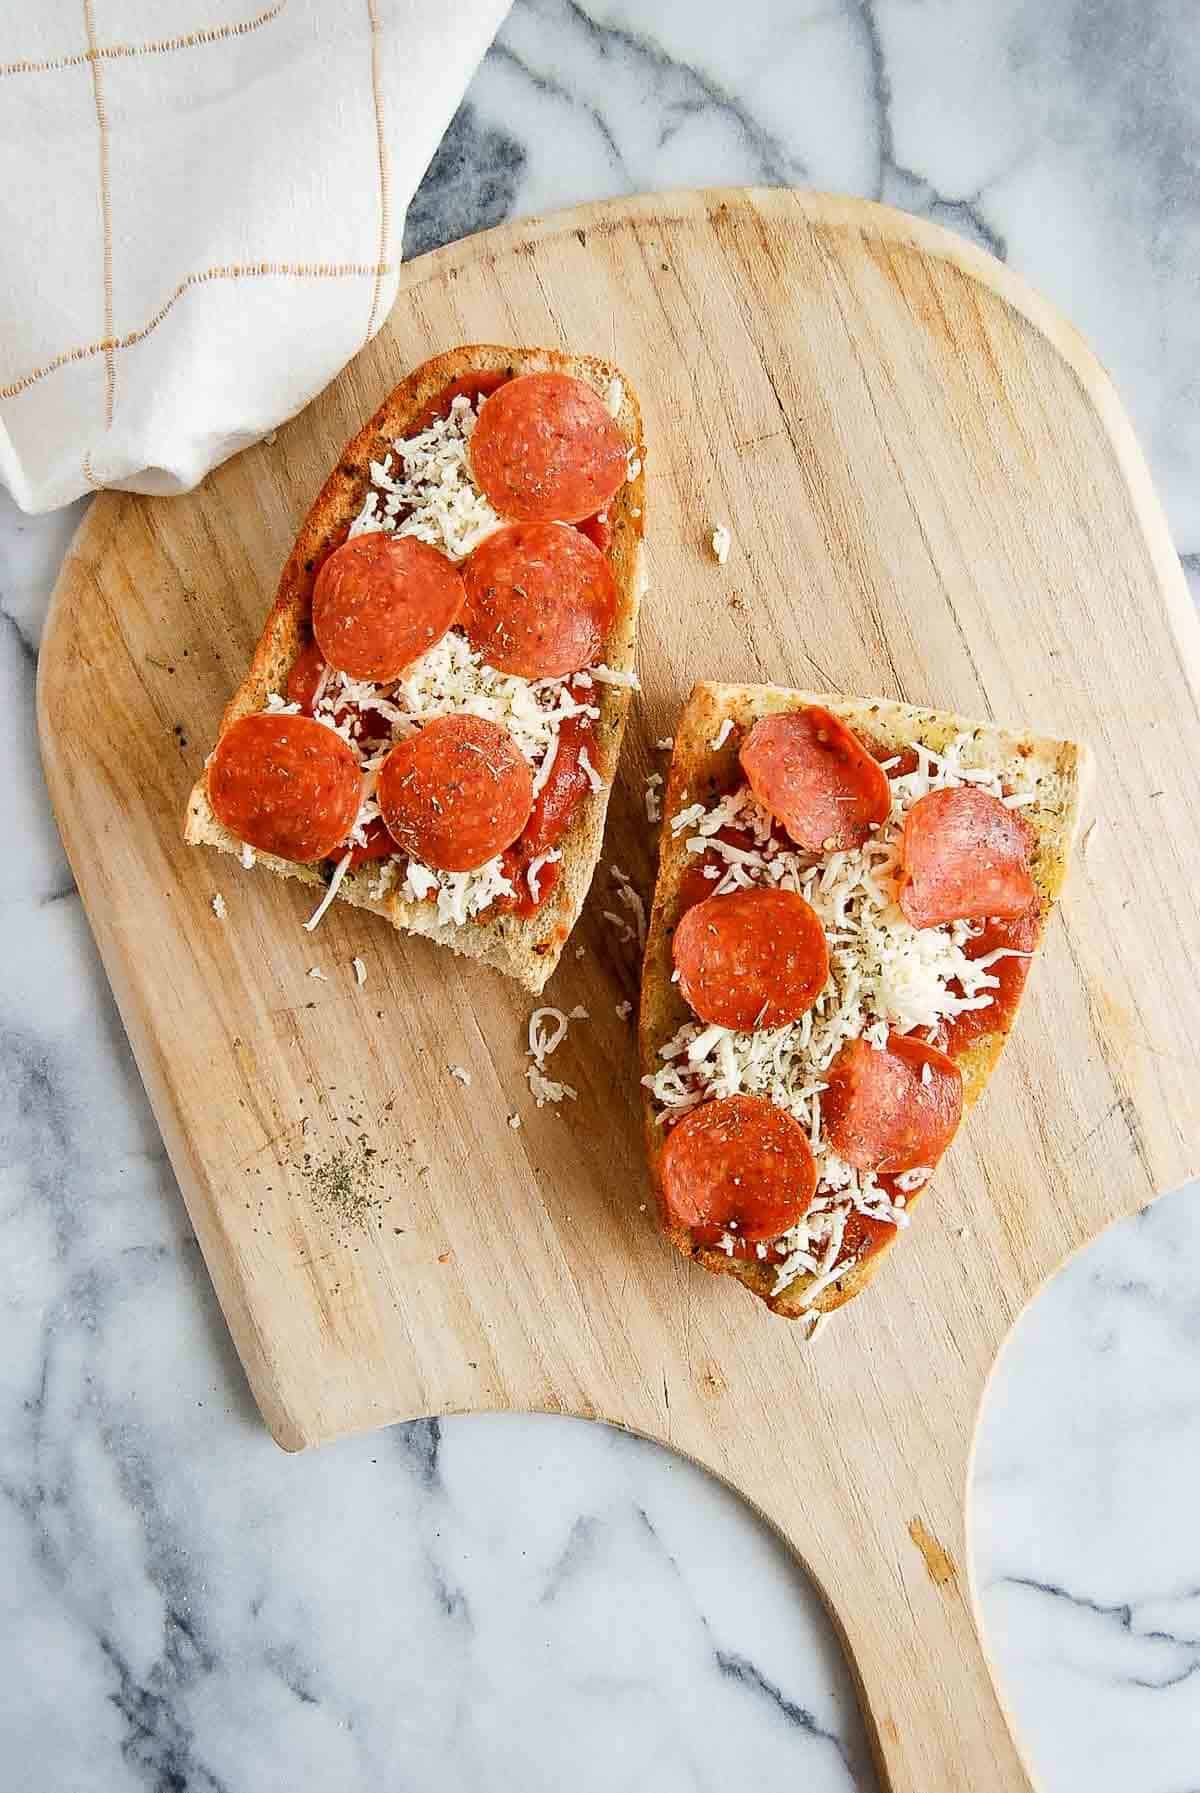 toasted french bread with pizza sauce, shredded mozzarella, and pepperoni on the top.